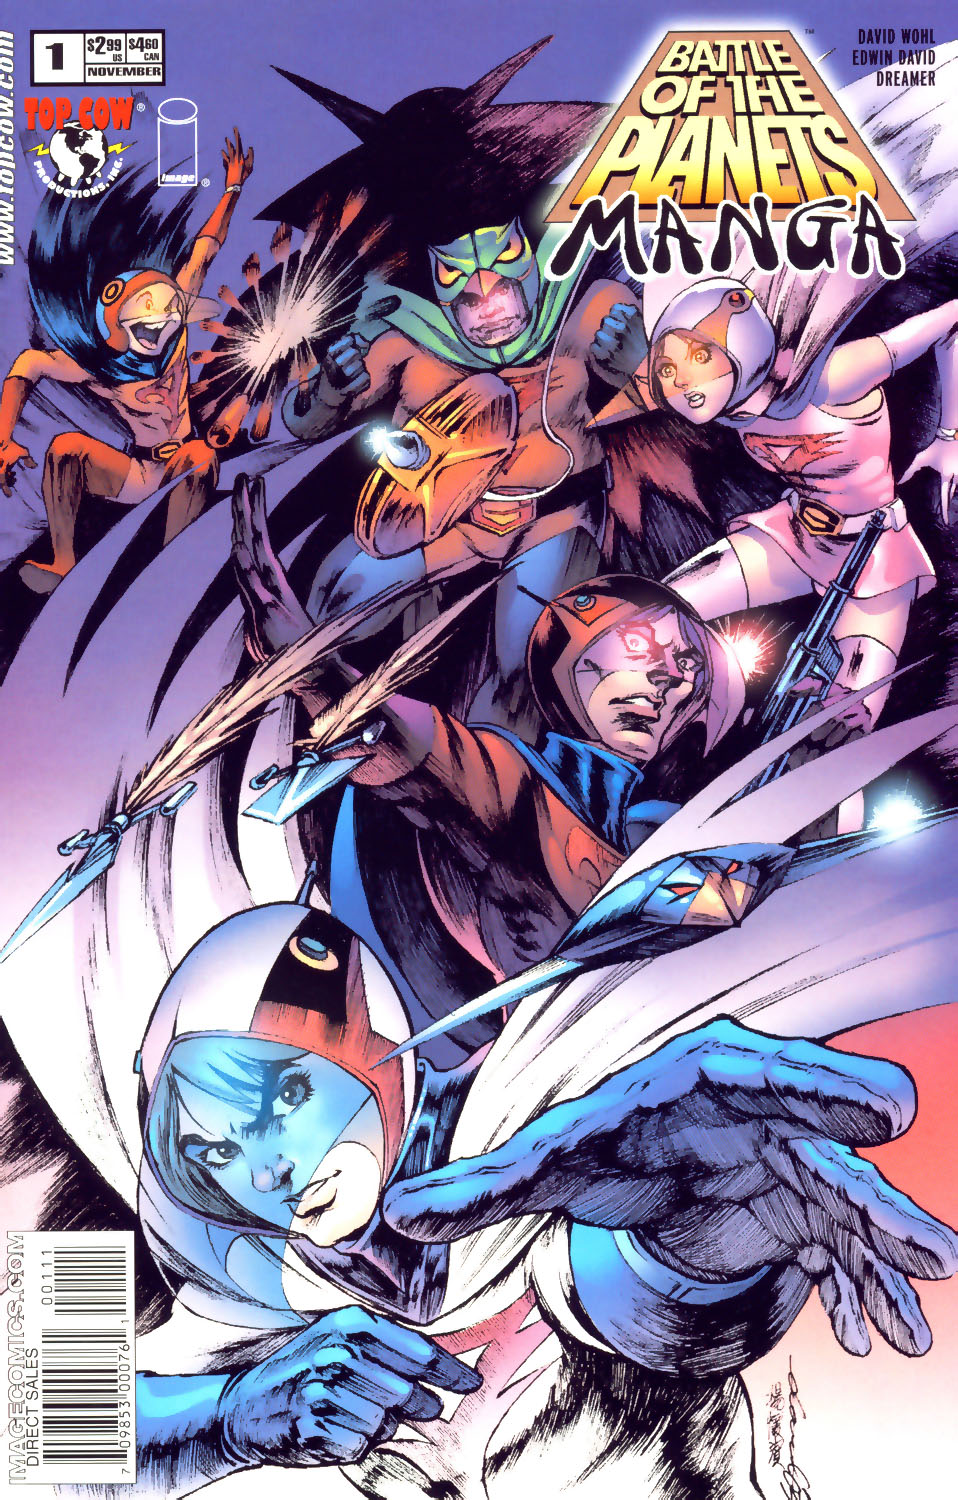 Read online Battle of the Planets: Manga comic -  Issue #1 - 1